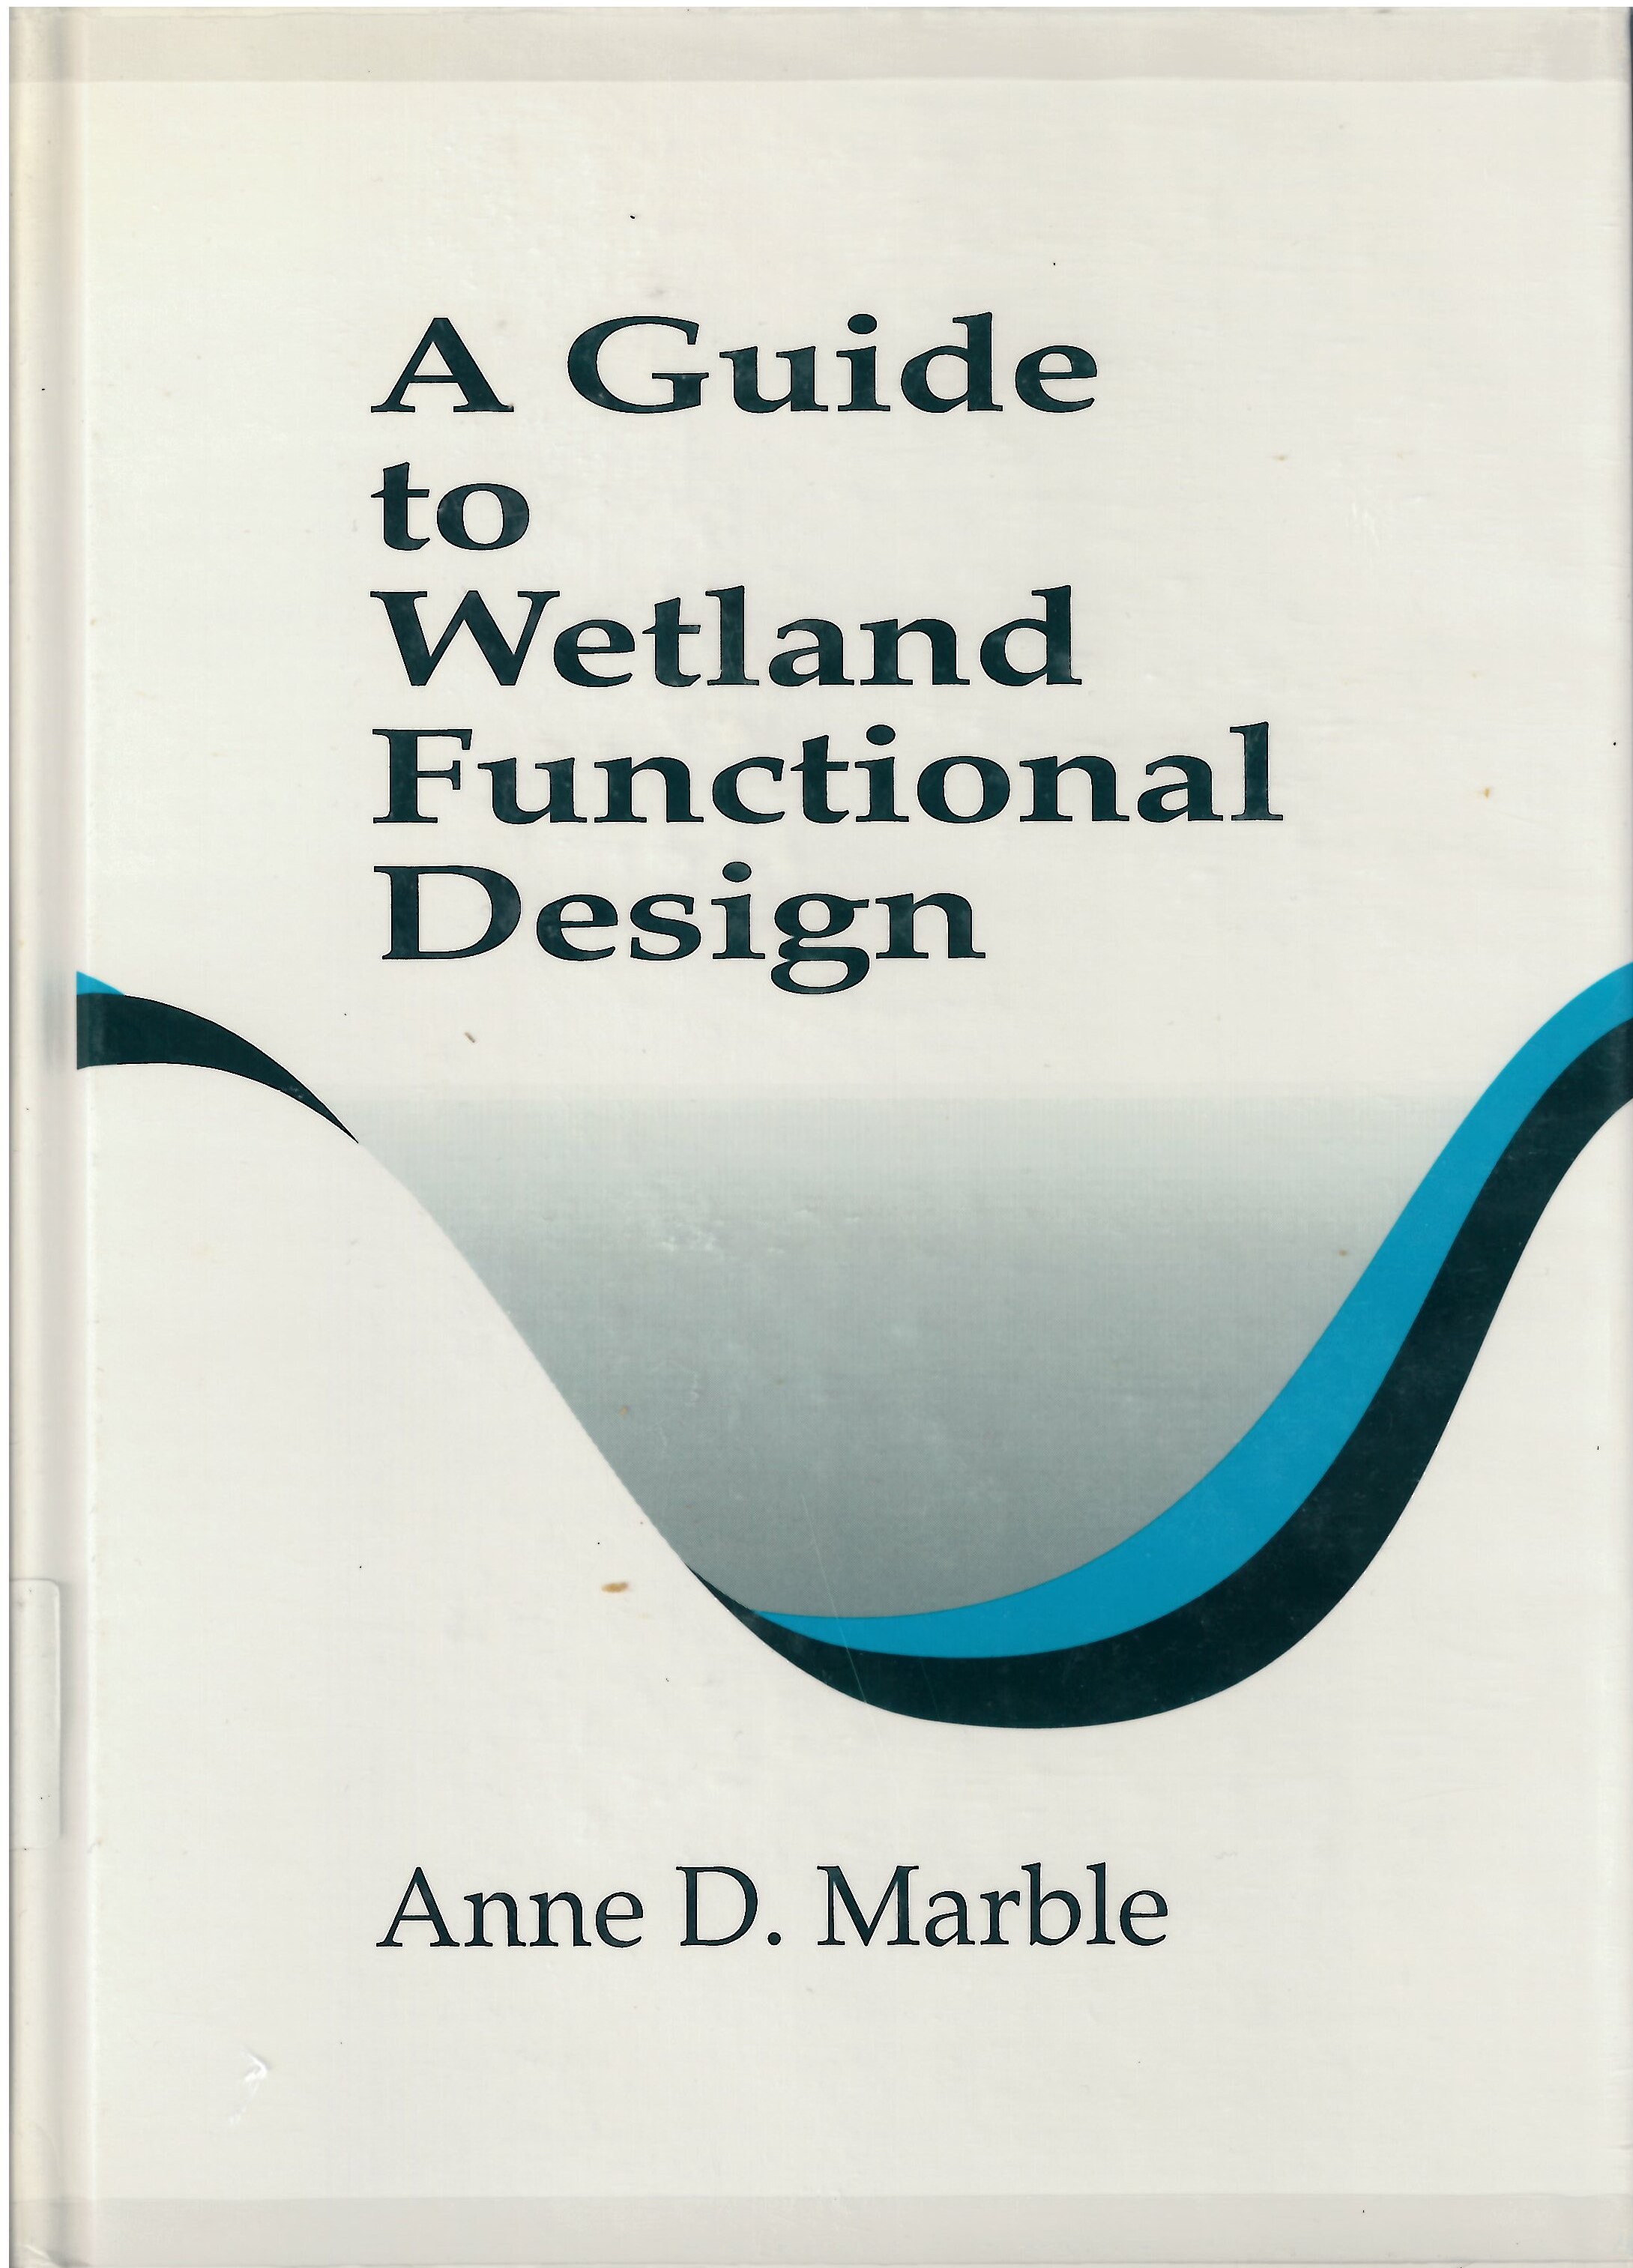 Guide to functional wetland design